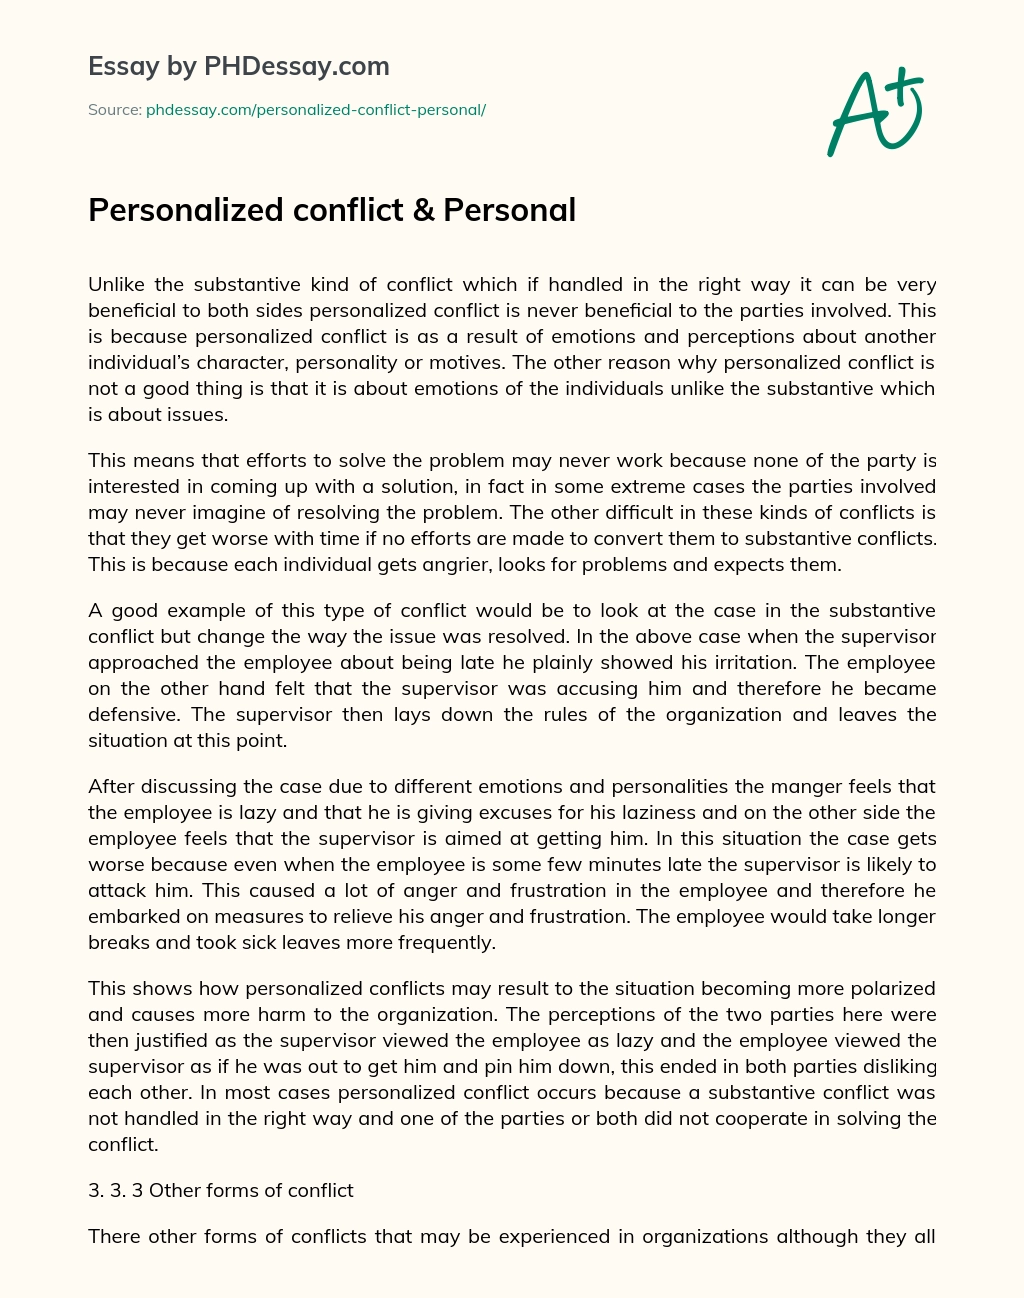 Personalized conflict &  Personal essay